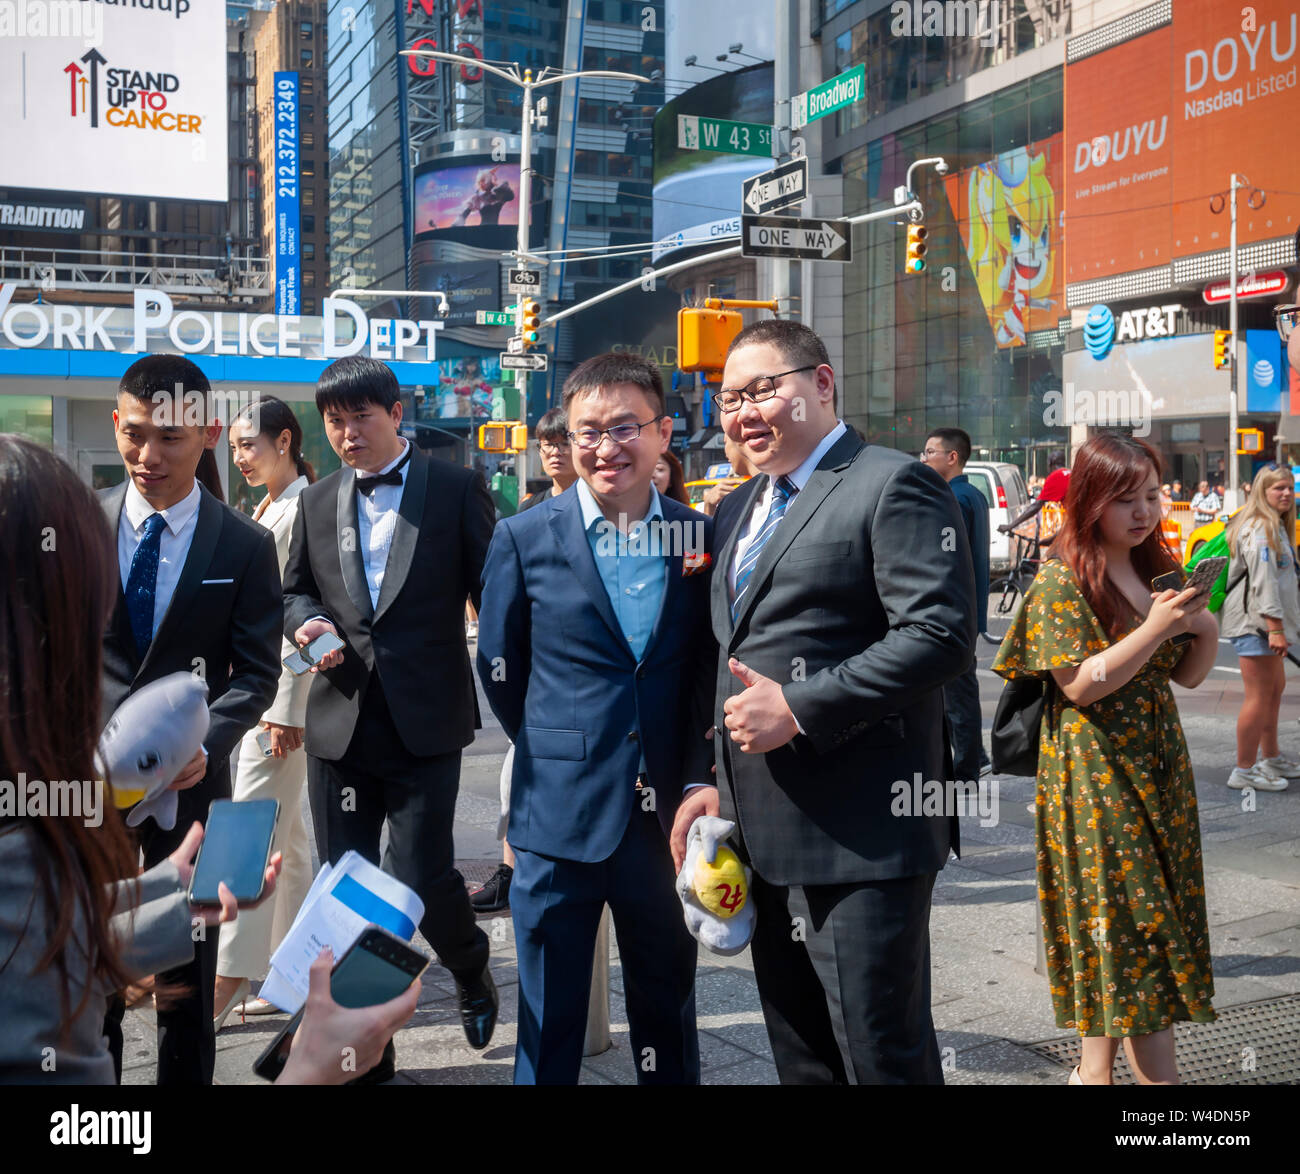 Shaojie Chen CEO and Founder of DouYu, left center, poses with employees during the IPO of DouYu International Holdings LTD. at the Nasdaq stock exchange in New York on Wednesday, July 17, 2019. DouYu is the largest live-streaming platform in China and is backed by Tencent Holdings Ltd. Valuing the company at $3.73 billion it is the largest Chinese IPO in 2019. (© Richard B. Levine) Stock Photo